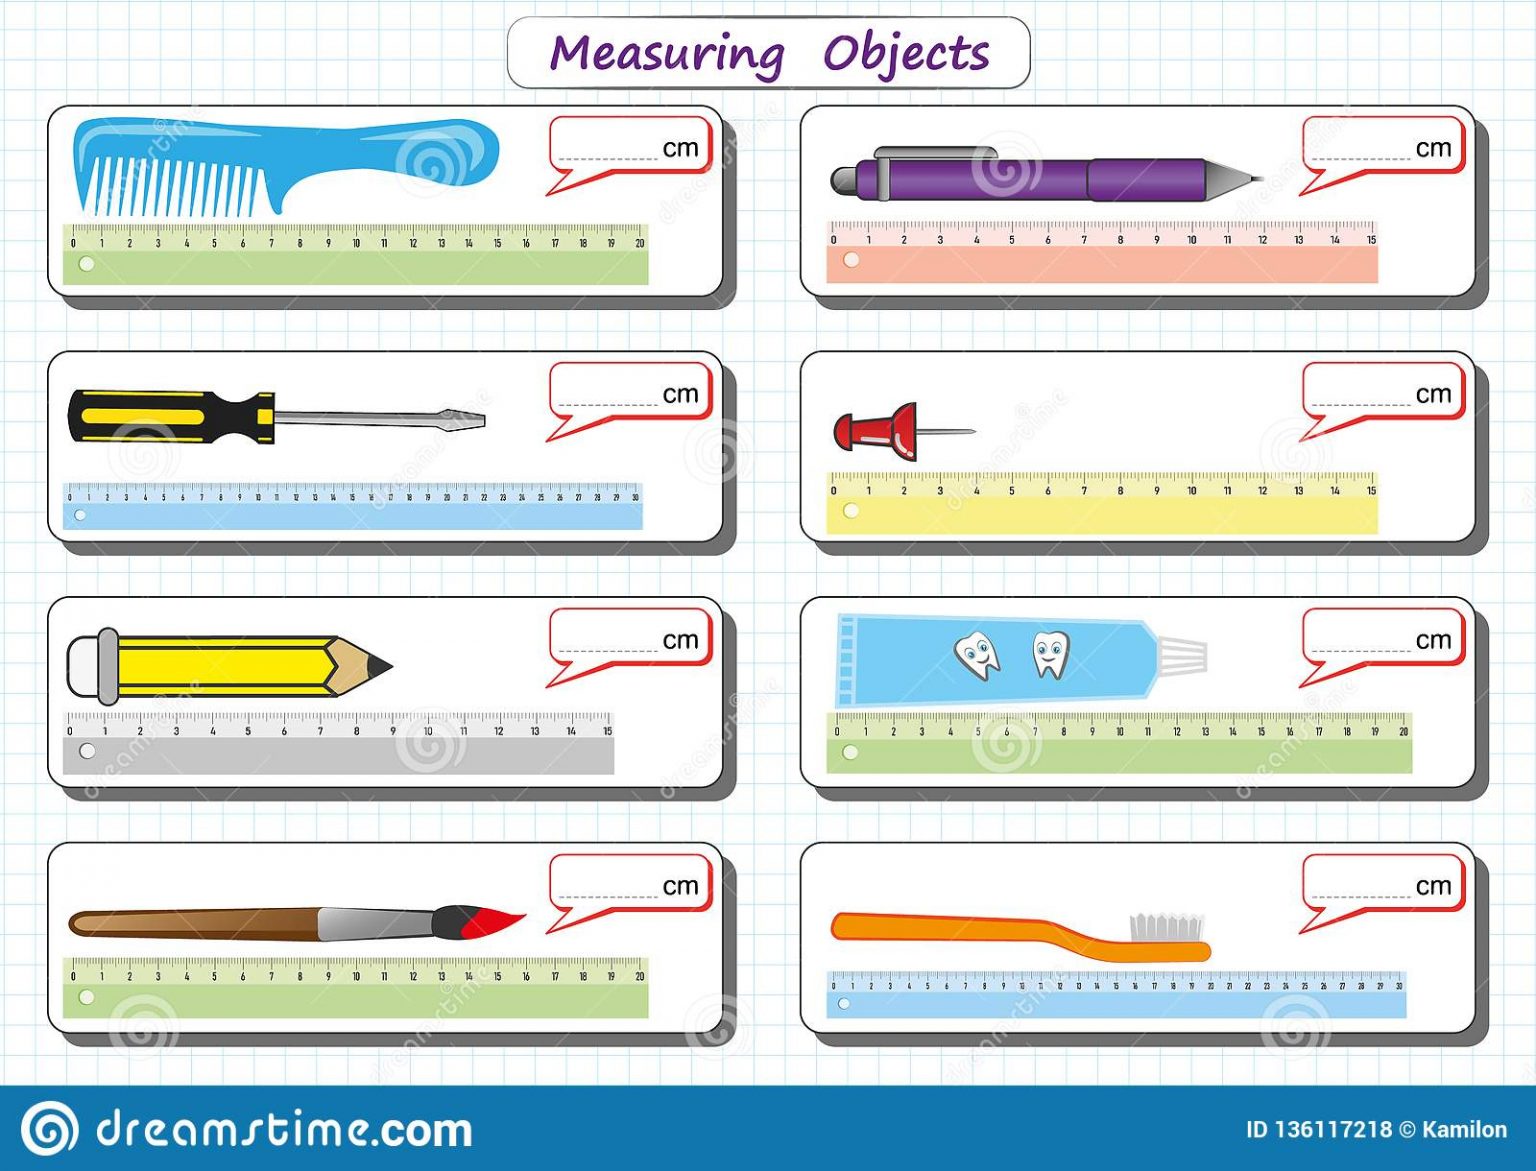 Measuring Length Of The Objects With Ruler Worksheet For Printable